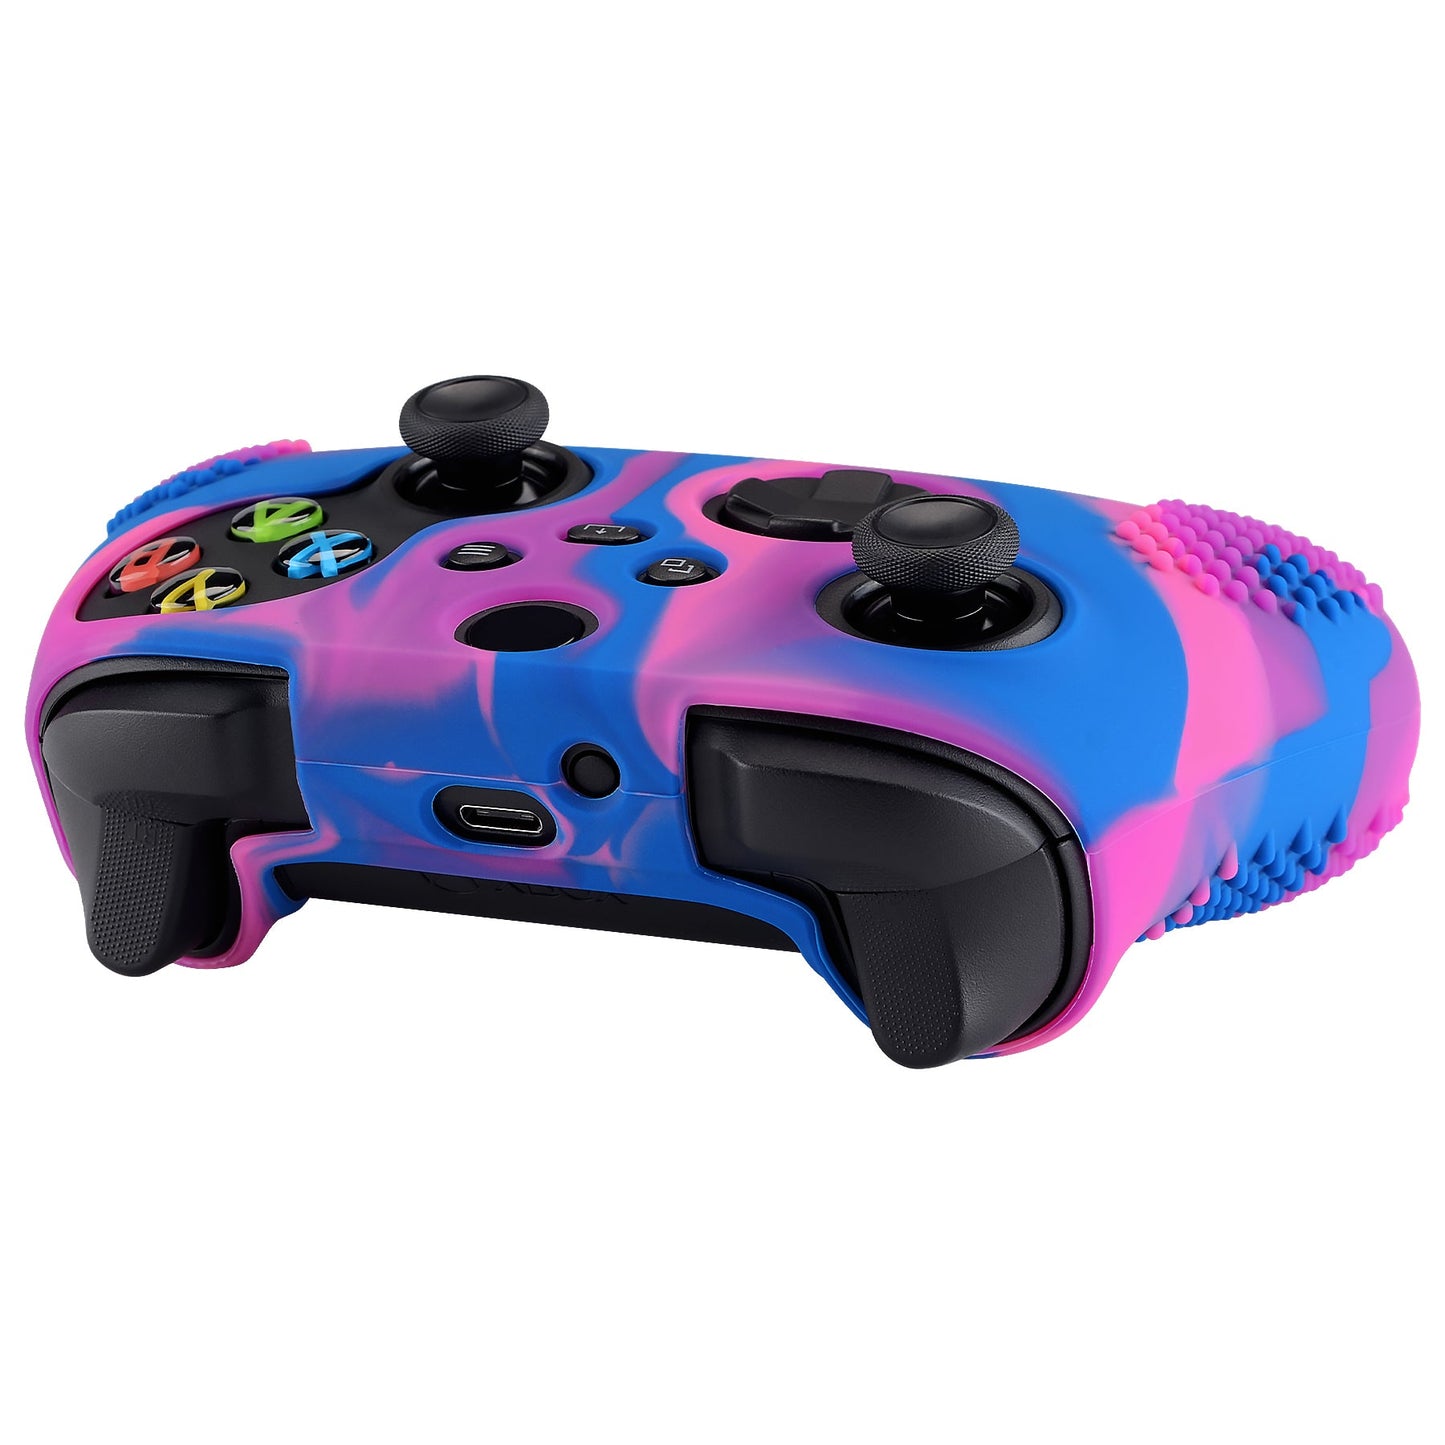 PlayVital Pink & Purple & Blue 3D Studded Edition Anti-slip Silicone Cover Skin for Xbox Series X Controller, Soft Rubber Case Protector for Xbox Series S Controller with 6 Black Thumb Grip Caps - SDX3015 PlayVital